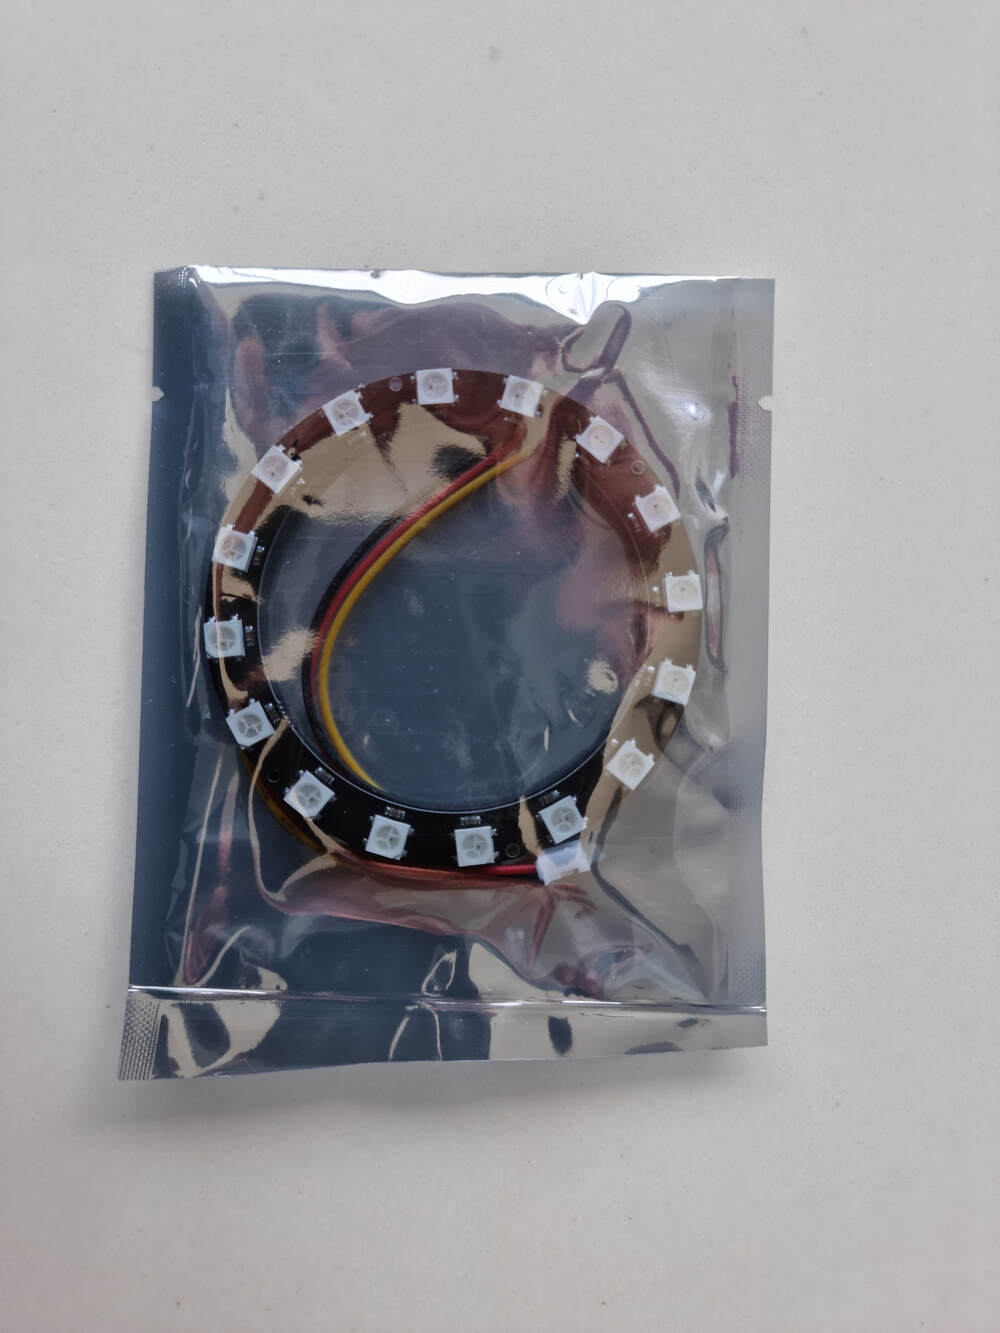 NeoPixel Ring - 16 x WS2812 5050 RGB LED with Integrated Drivers | ...